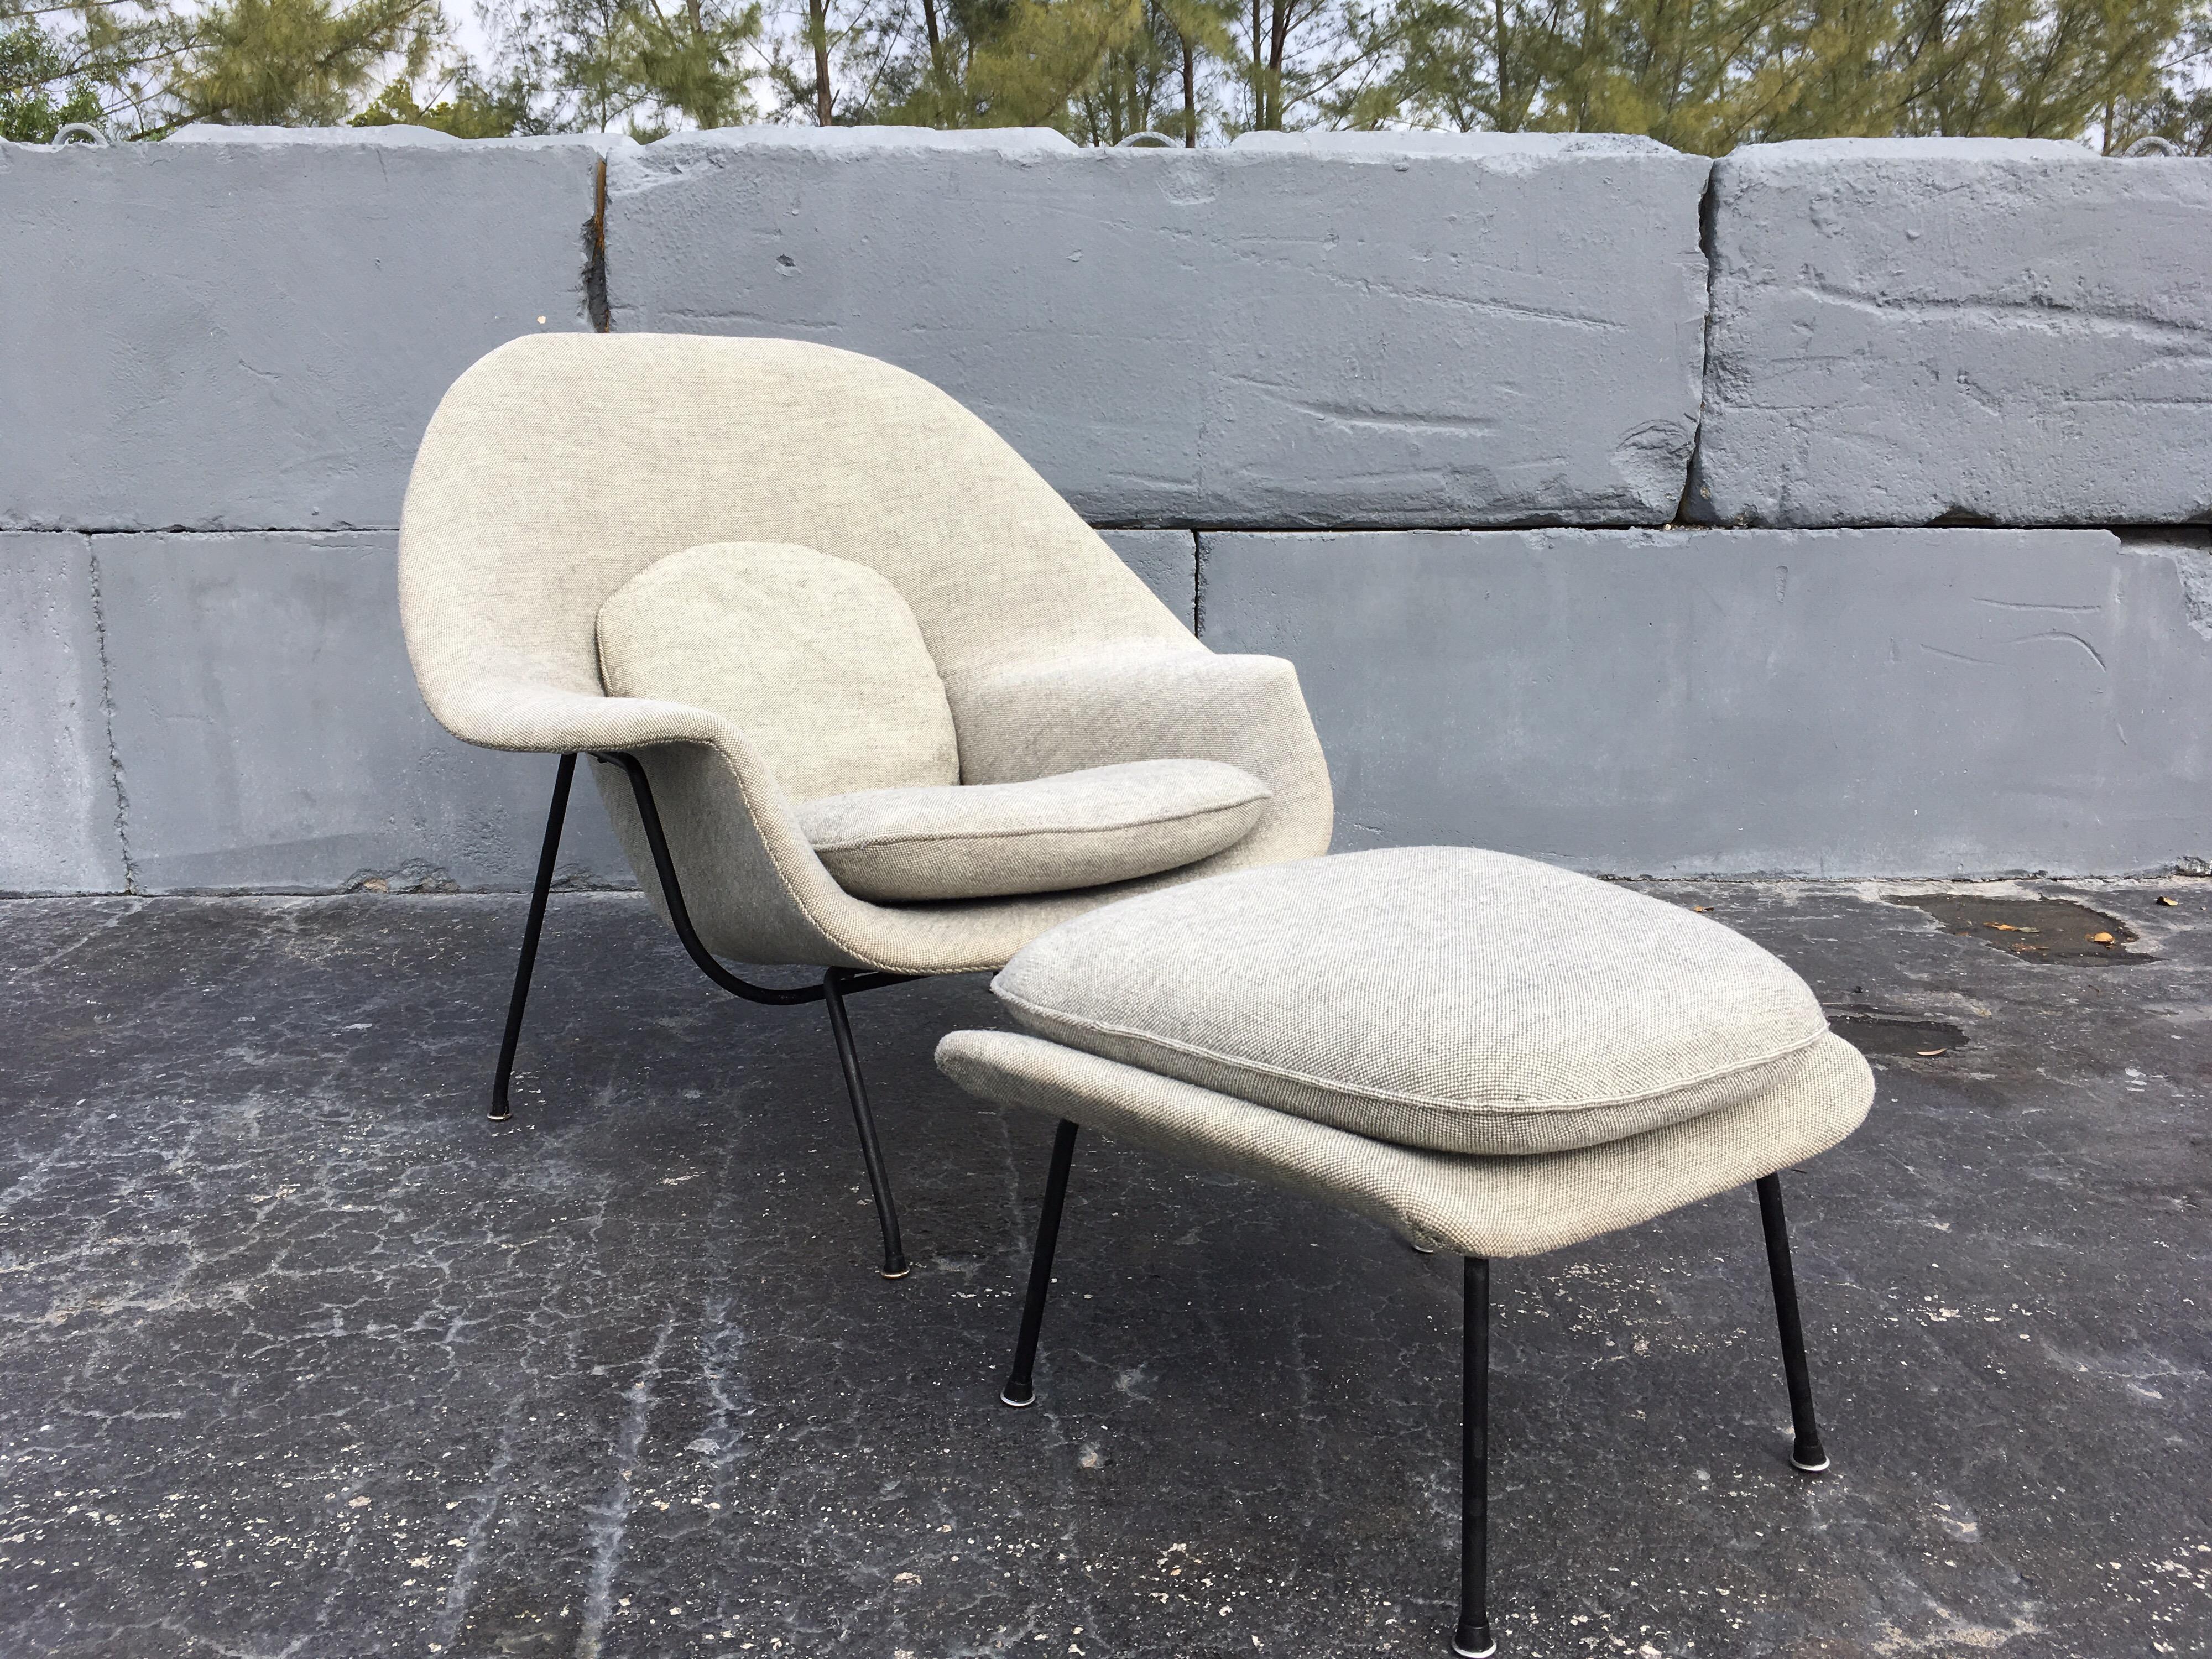 Early example, 'Womb' chair and ottoman by Saarinen for Knoll. We believe the fabric is original. Fabric and foam are in good condition for the age. Iron frame retains its original black paint and press-on glides. 
There is some normal paint loss